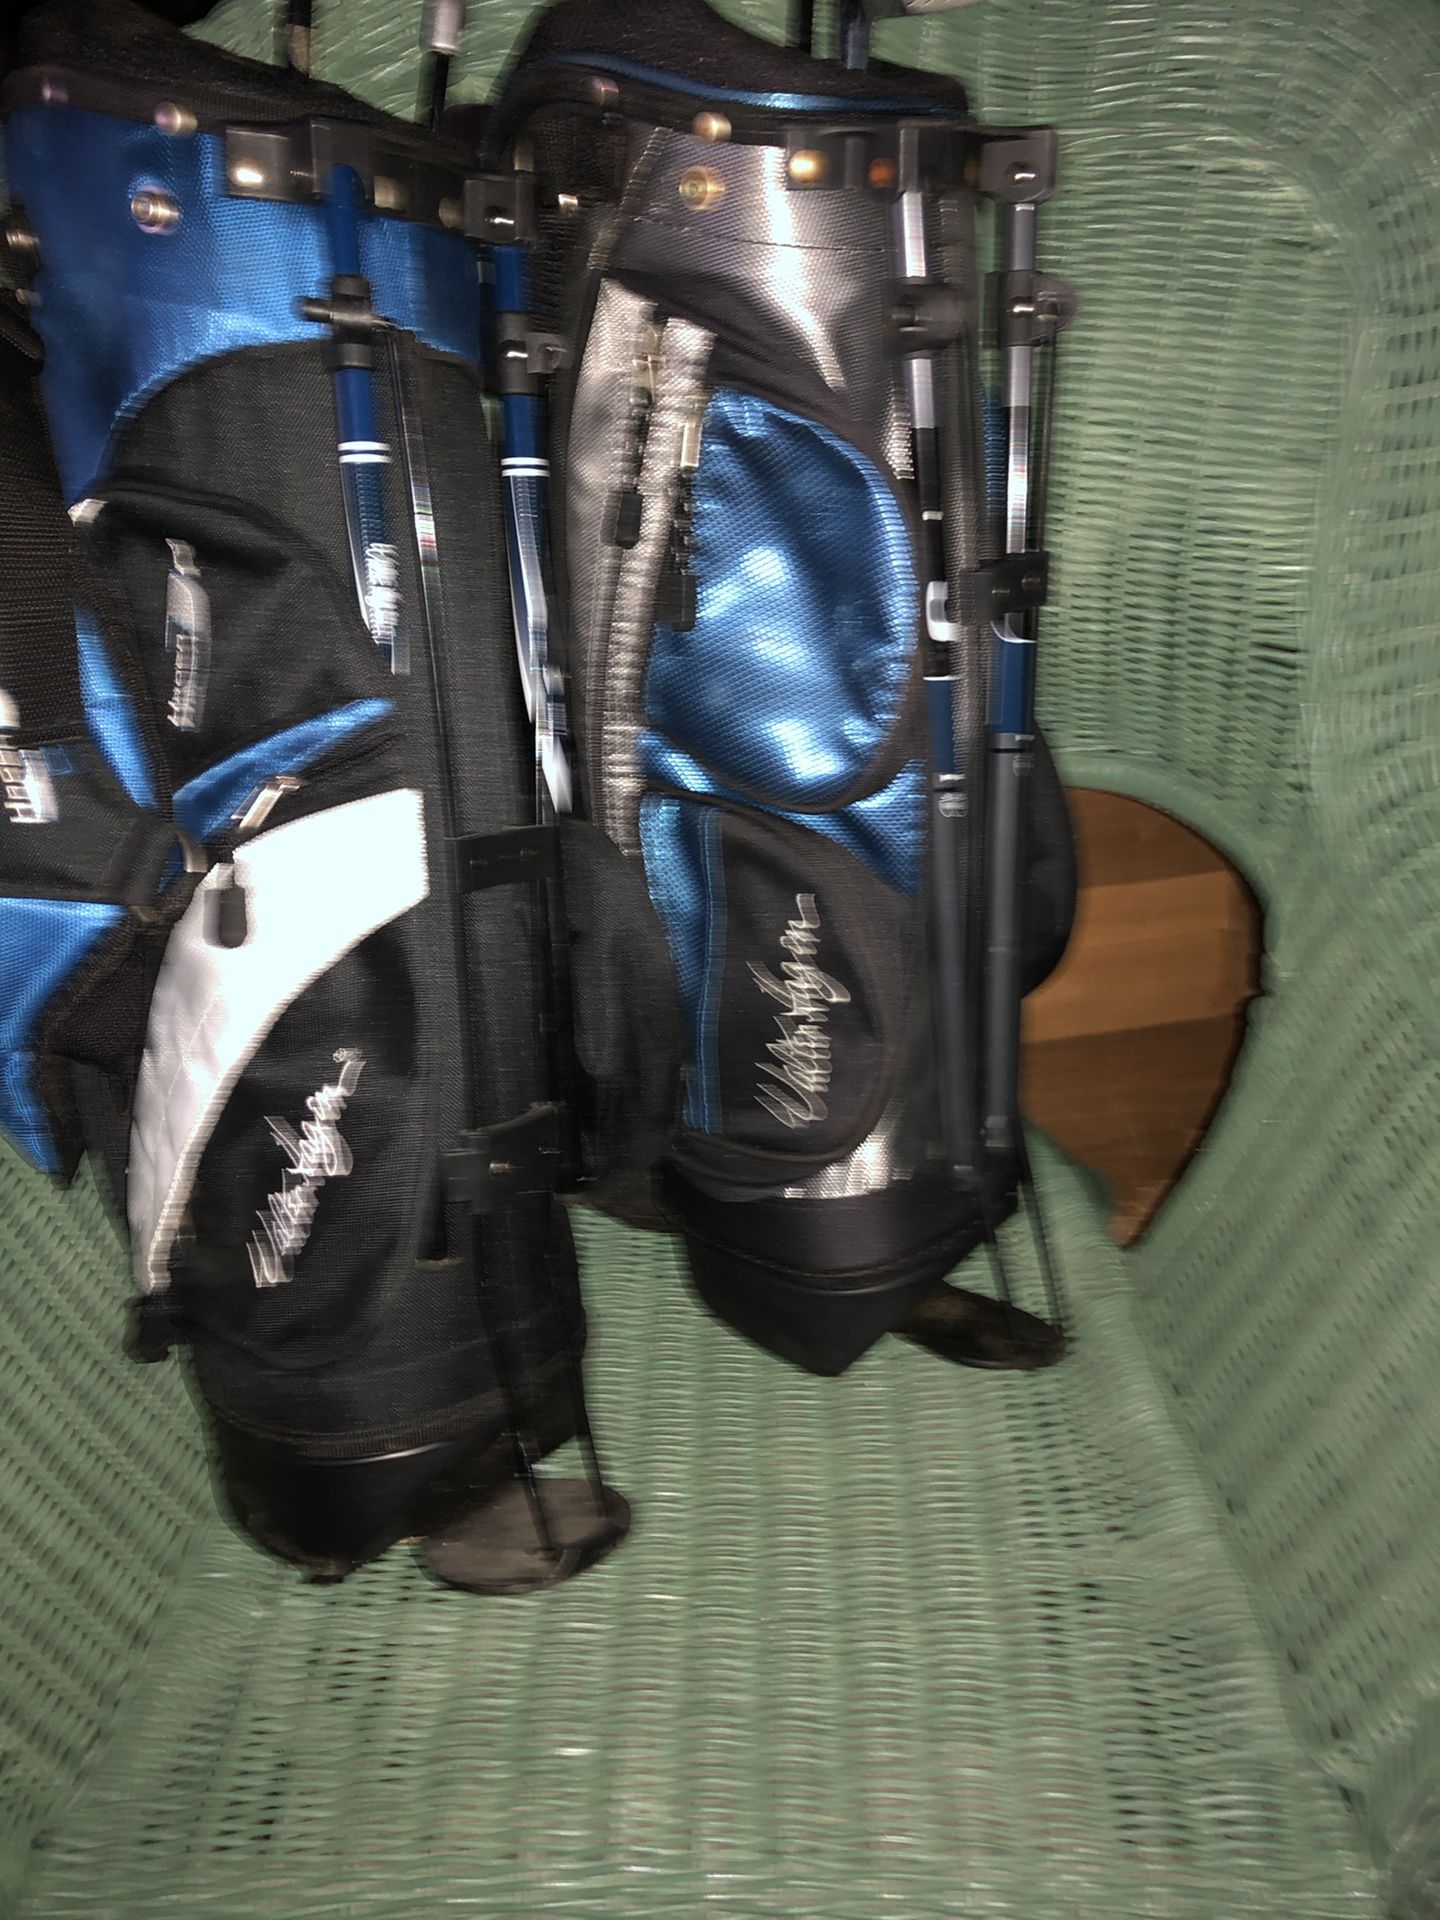 Kids golf bags and clubs